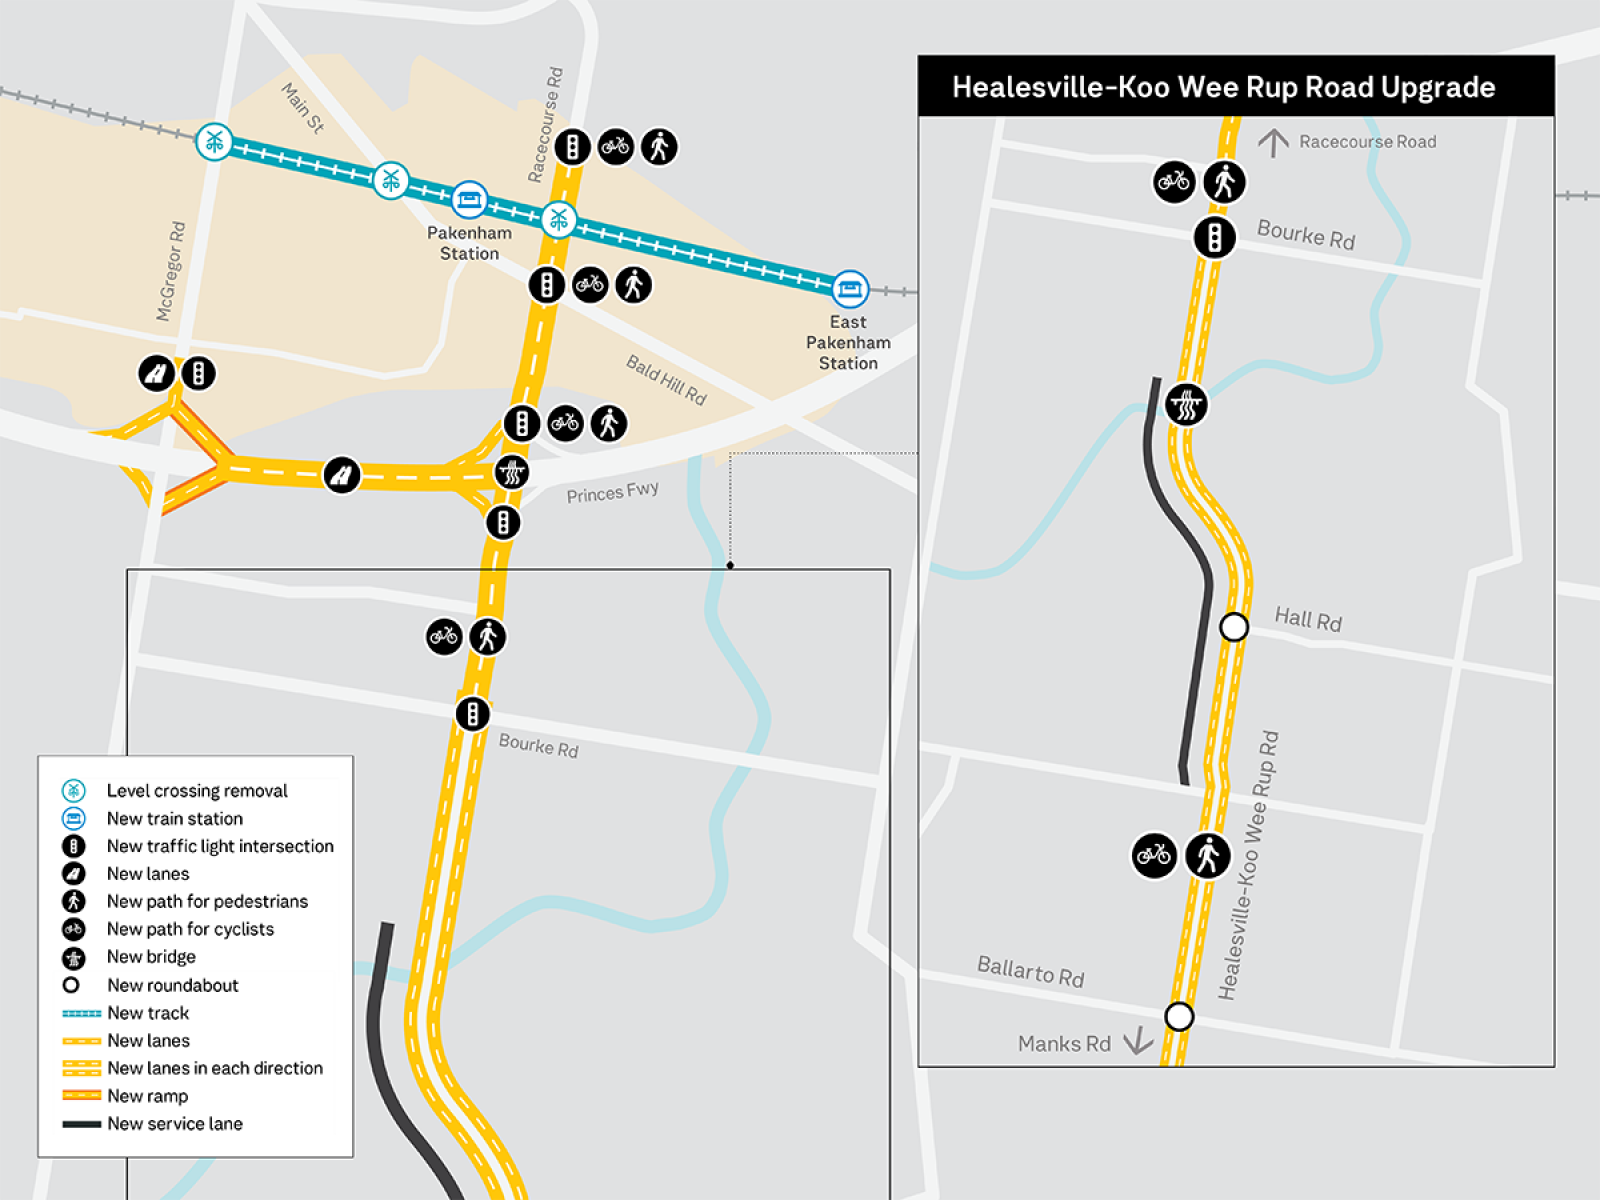 A map showing the projects happening in the Pakenham area: Main St, Racecourse and Main Rd level crossing removals, Pakenham and East Pakenham stations and the  Healesville-Koo Wee Rup Road Upgrade.